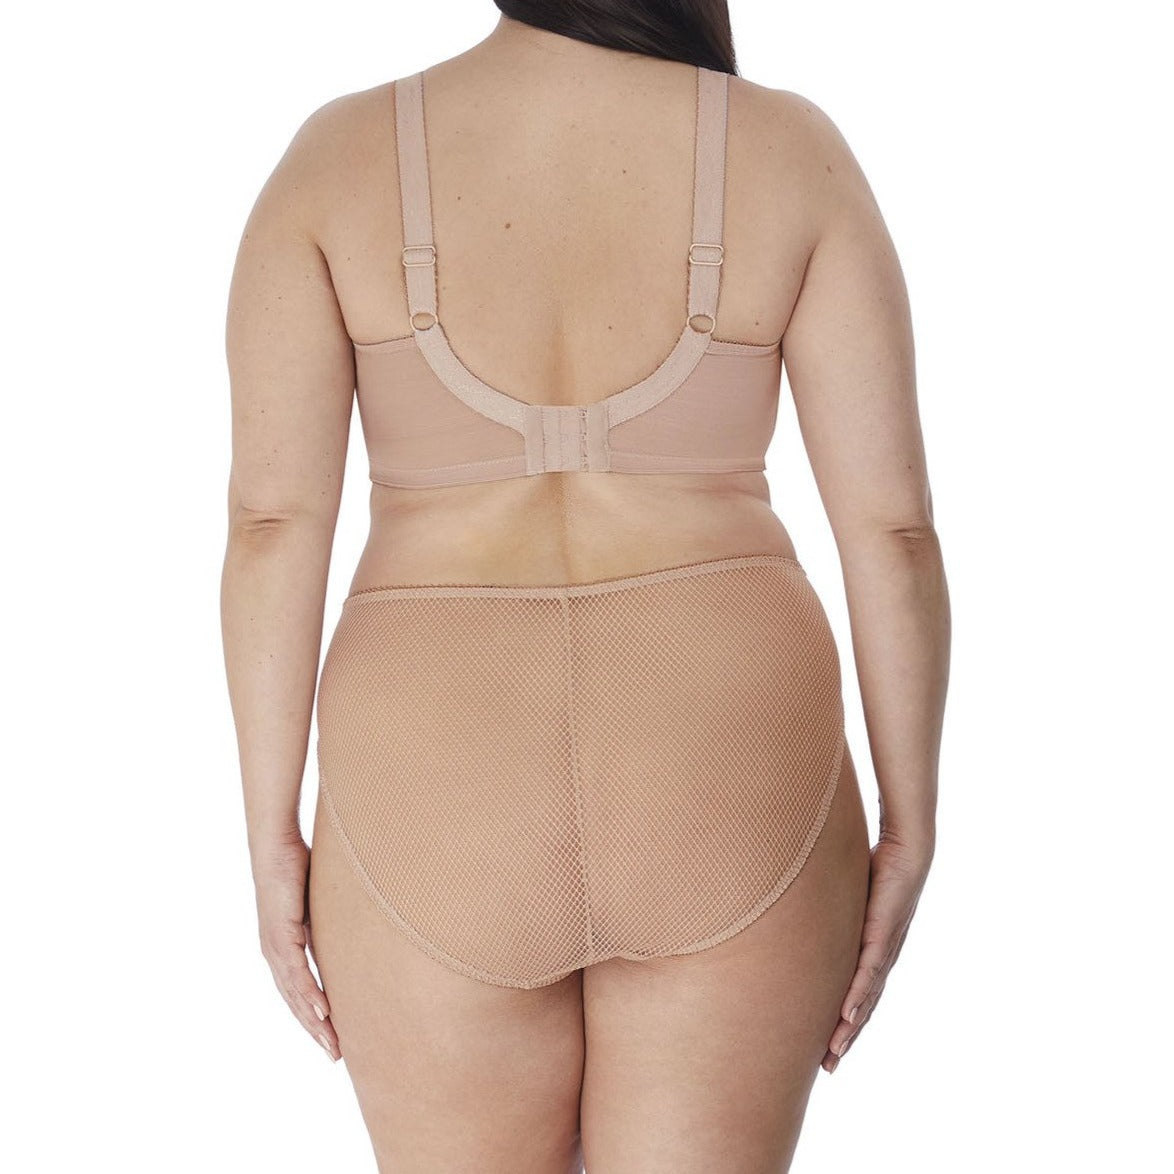 NEW Elomi 4383 Charley Bandless Spacer Seamless Underwire Bra Beige Size 34L